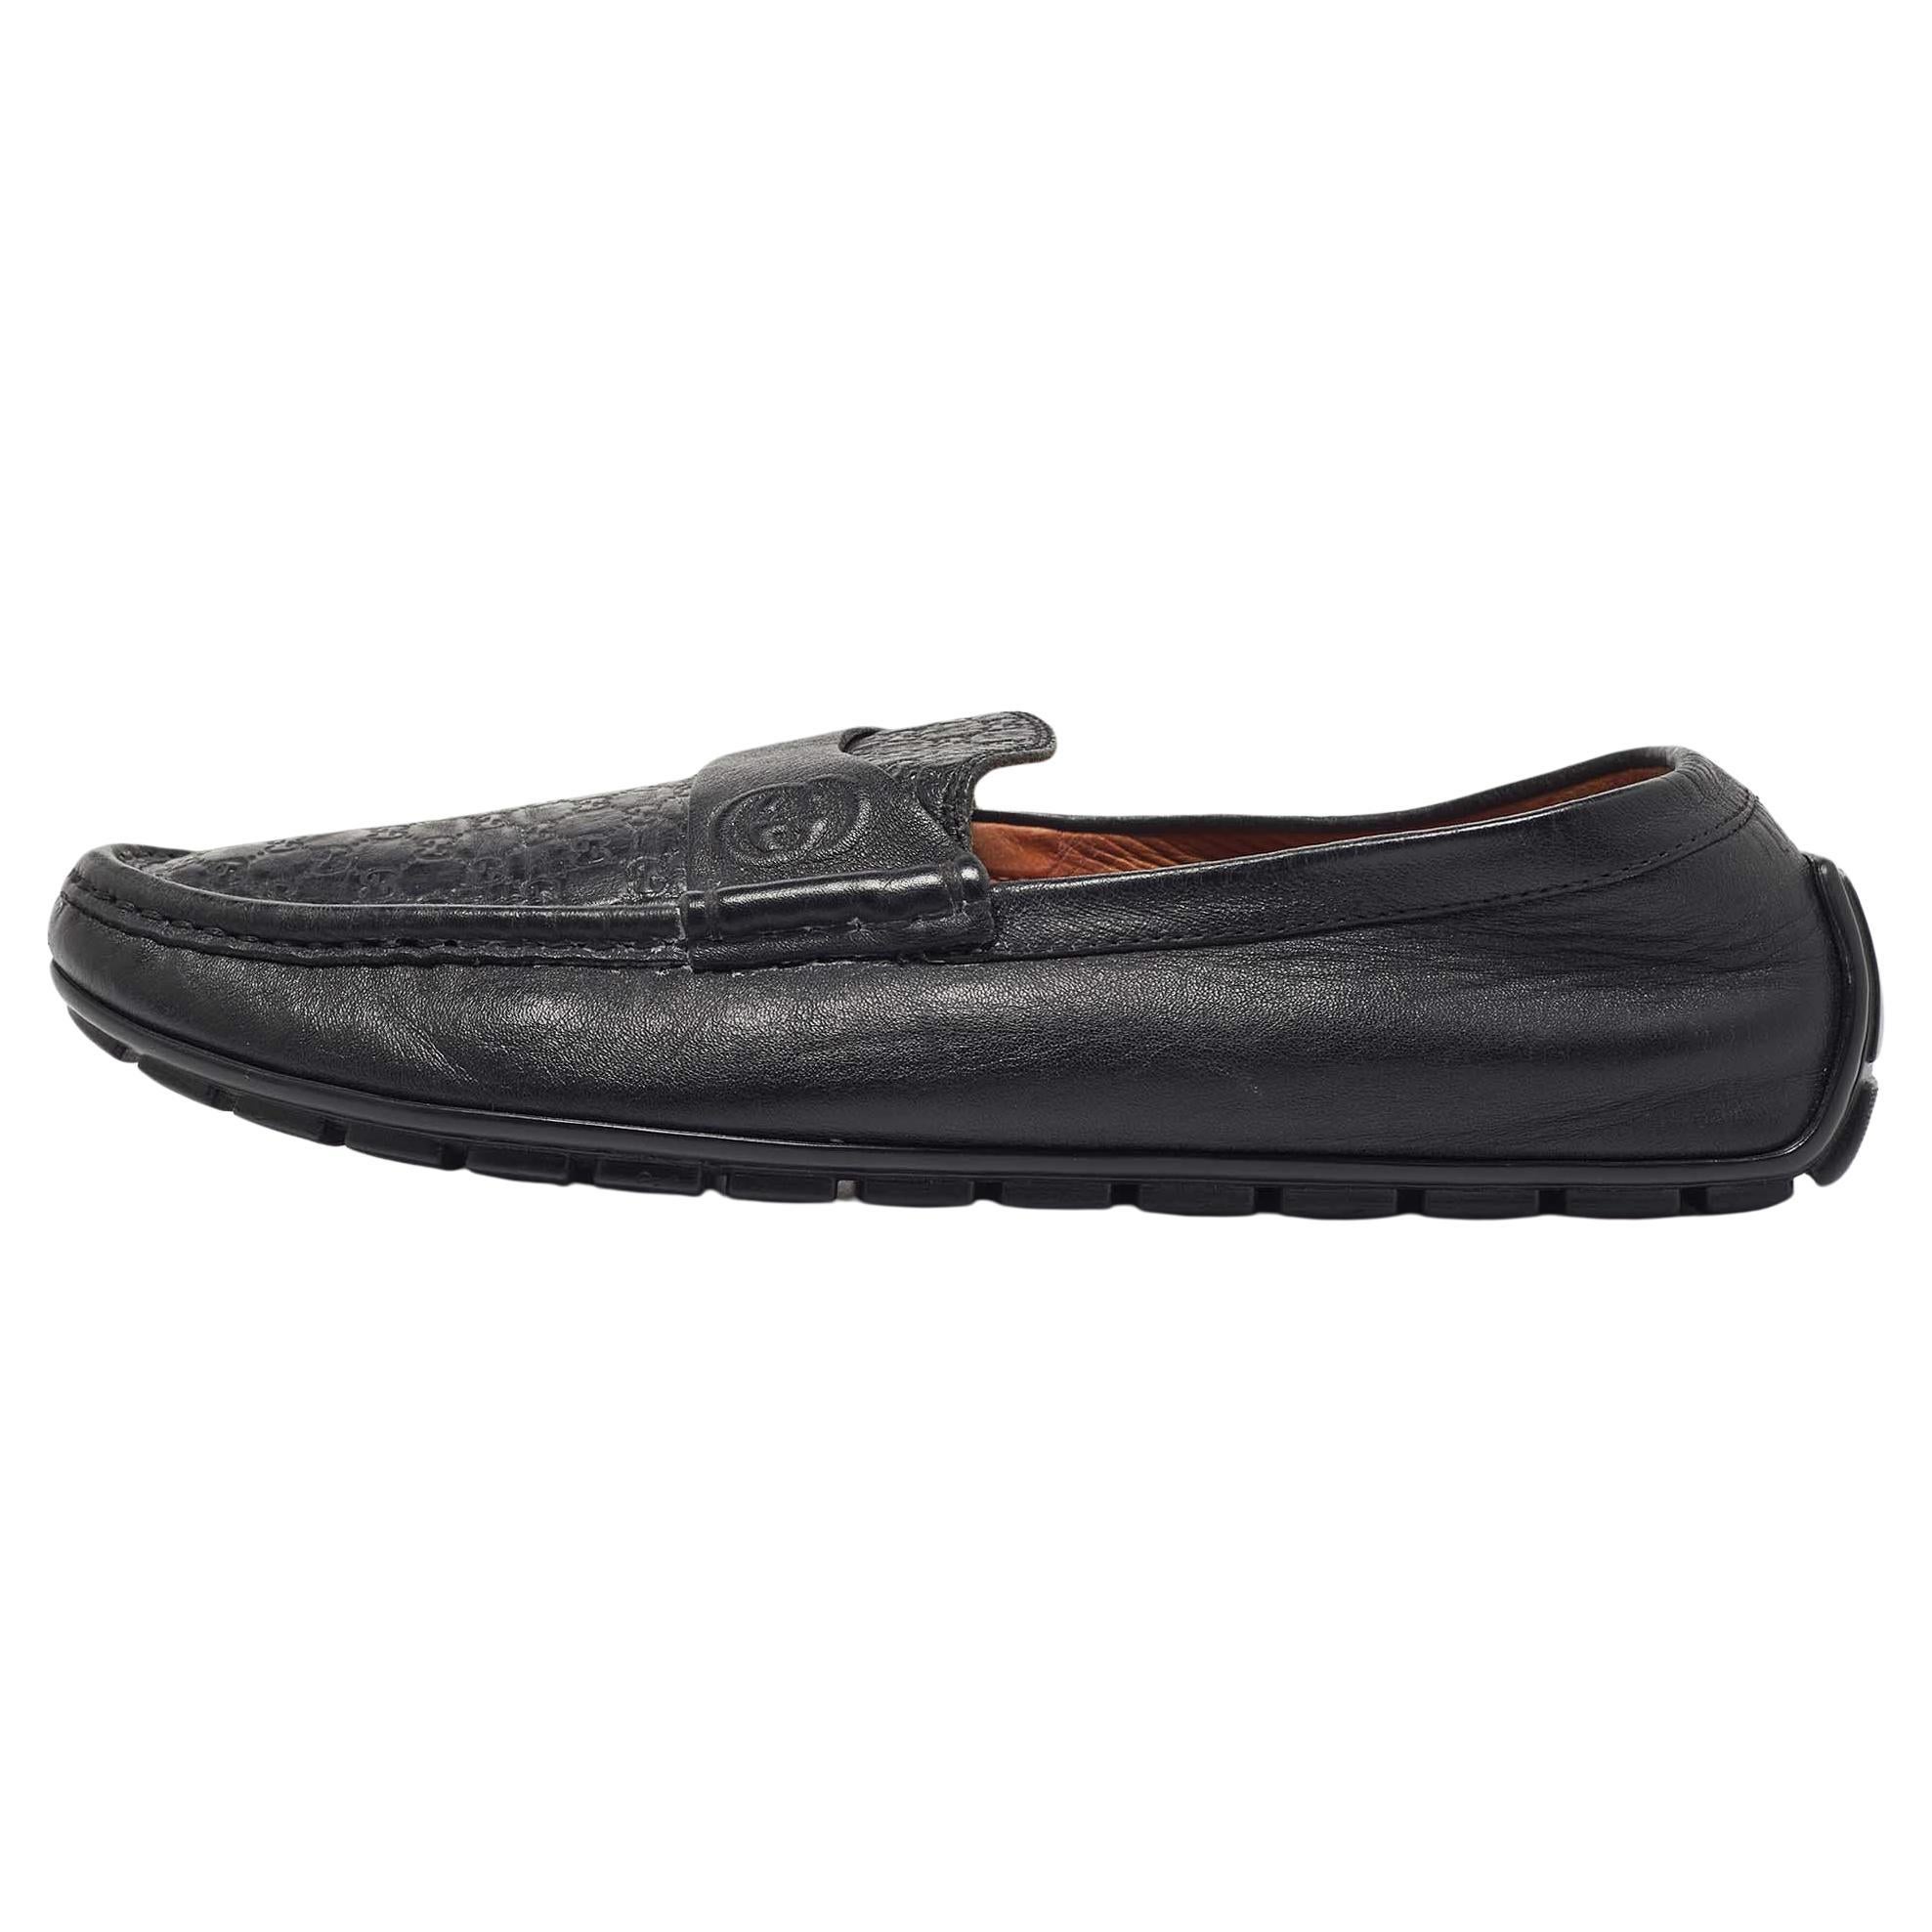 Gucci Black Microguccissima Leather Slip On Loafers Size 40.5 For Sale